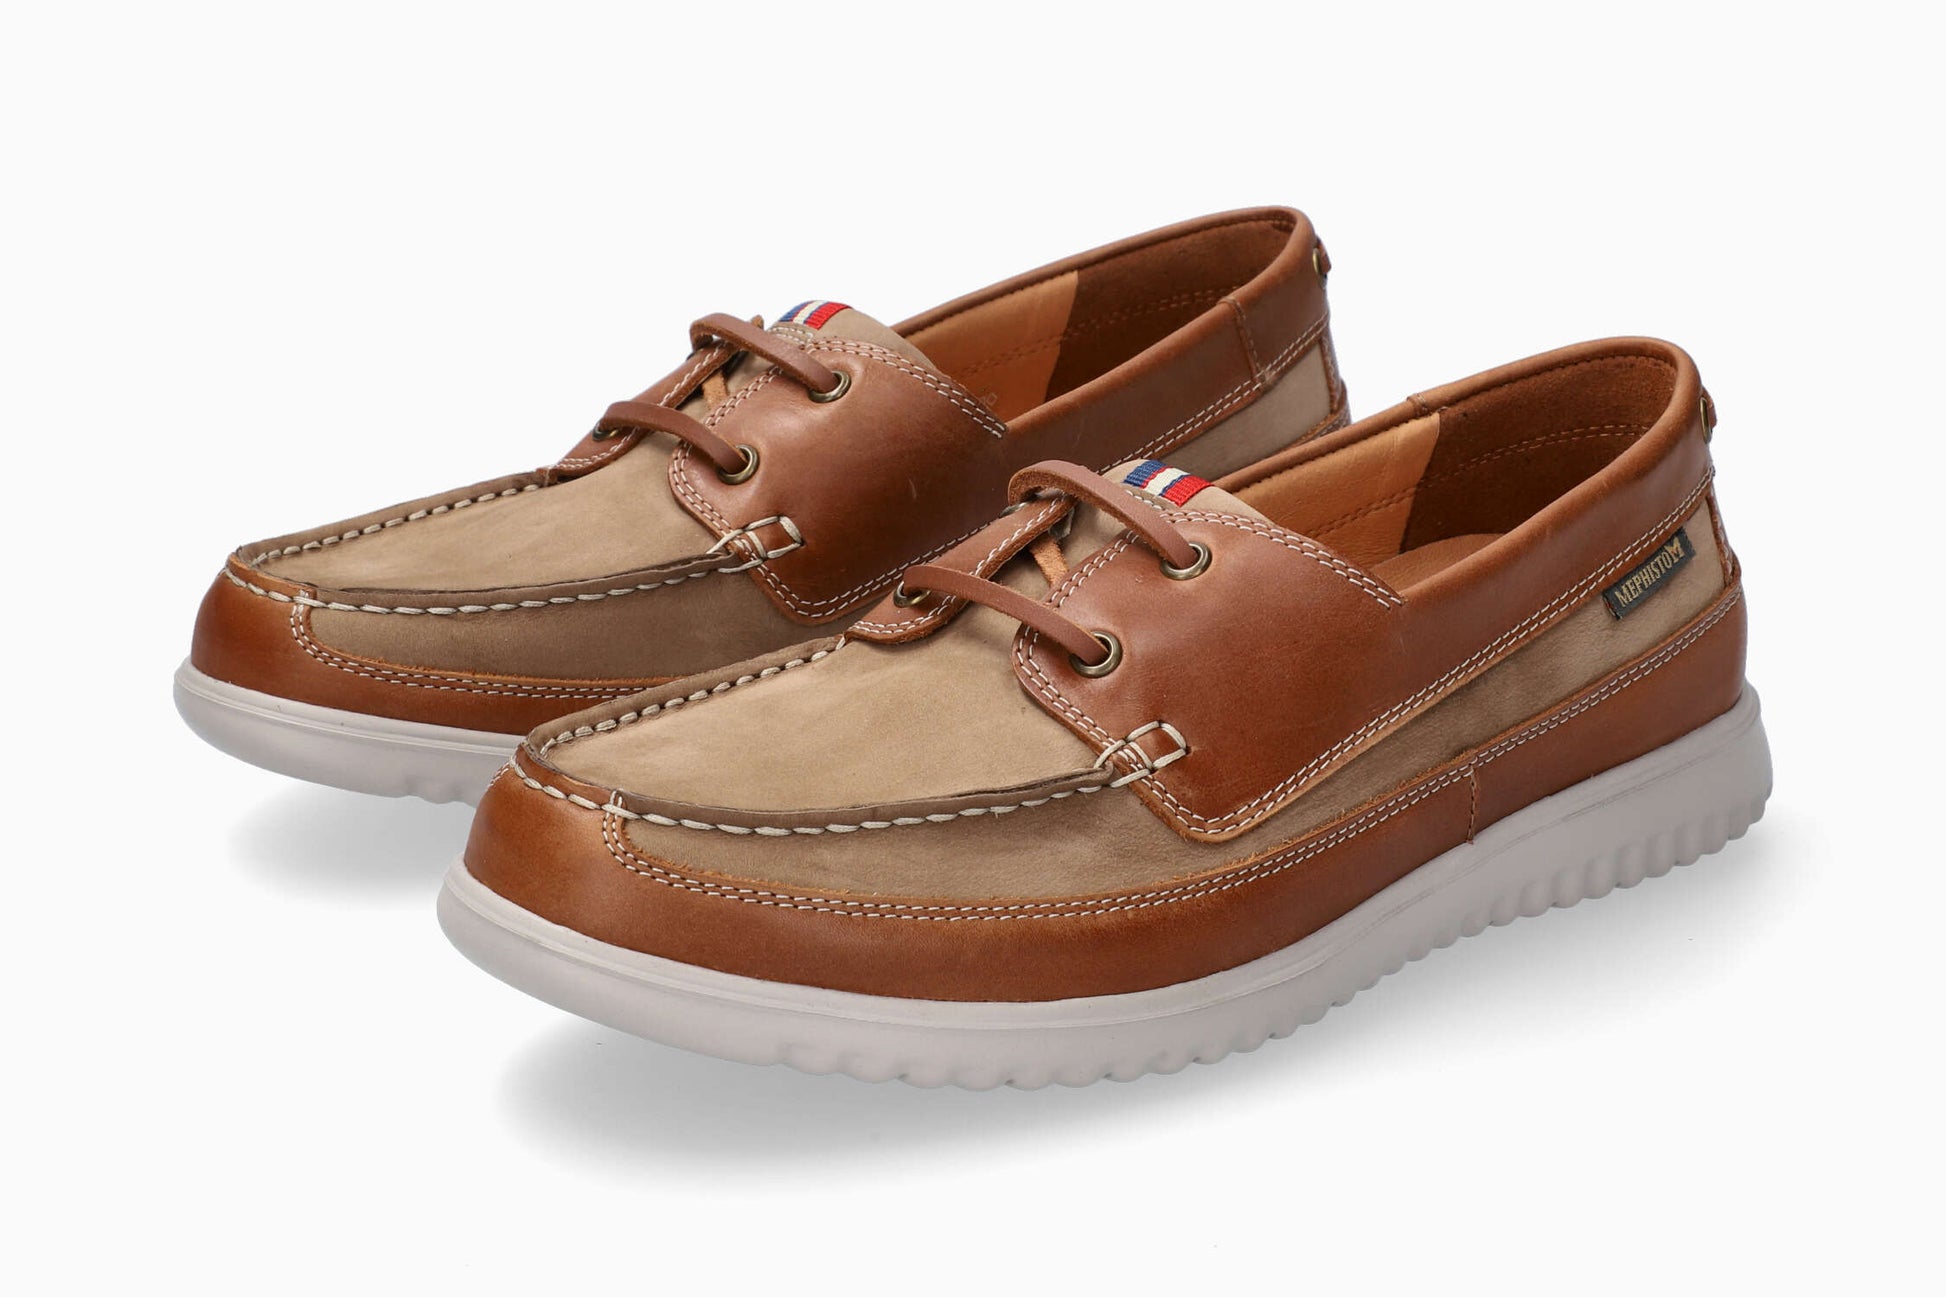 Mephisto Trevis Boat Shoe Taupe